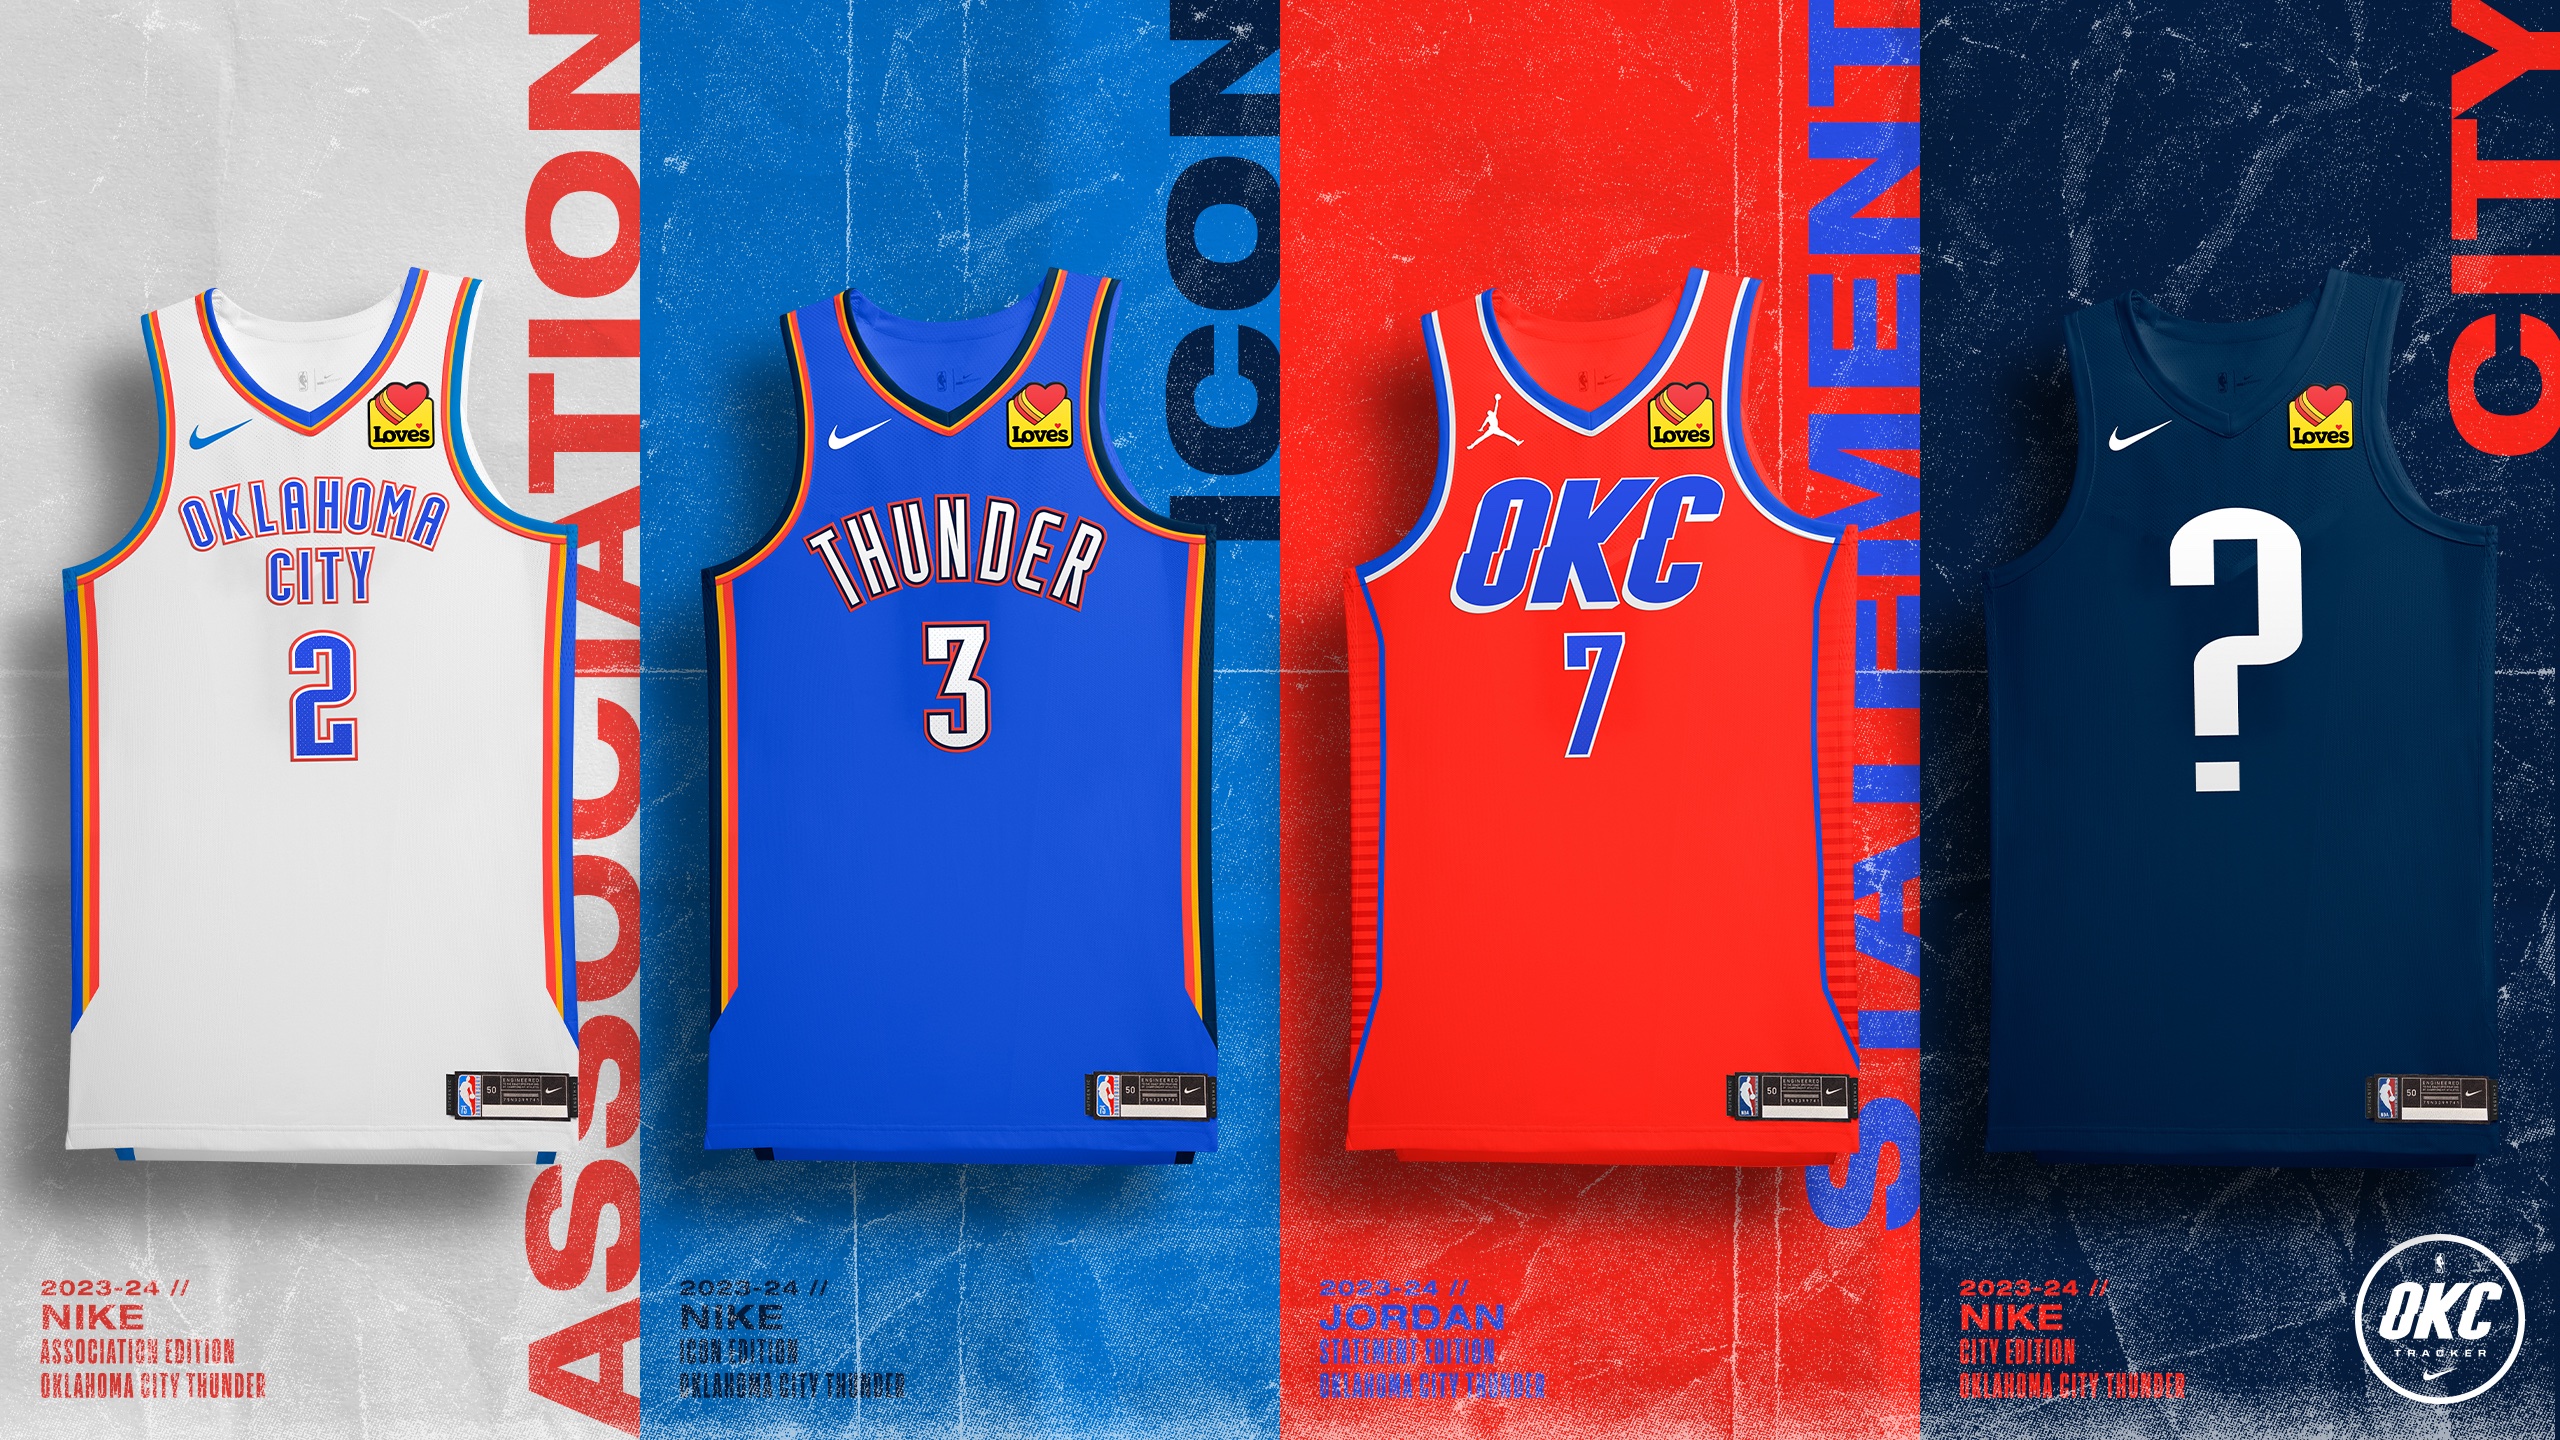 2022-23 OKC Thunder City Edition Jerseys, but with different Color